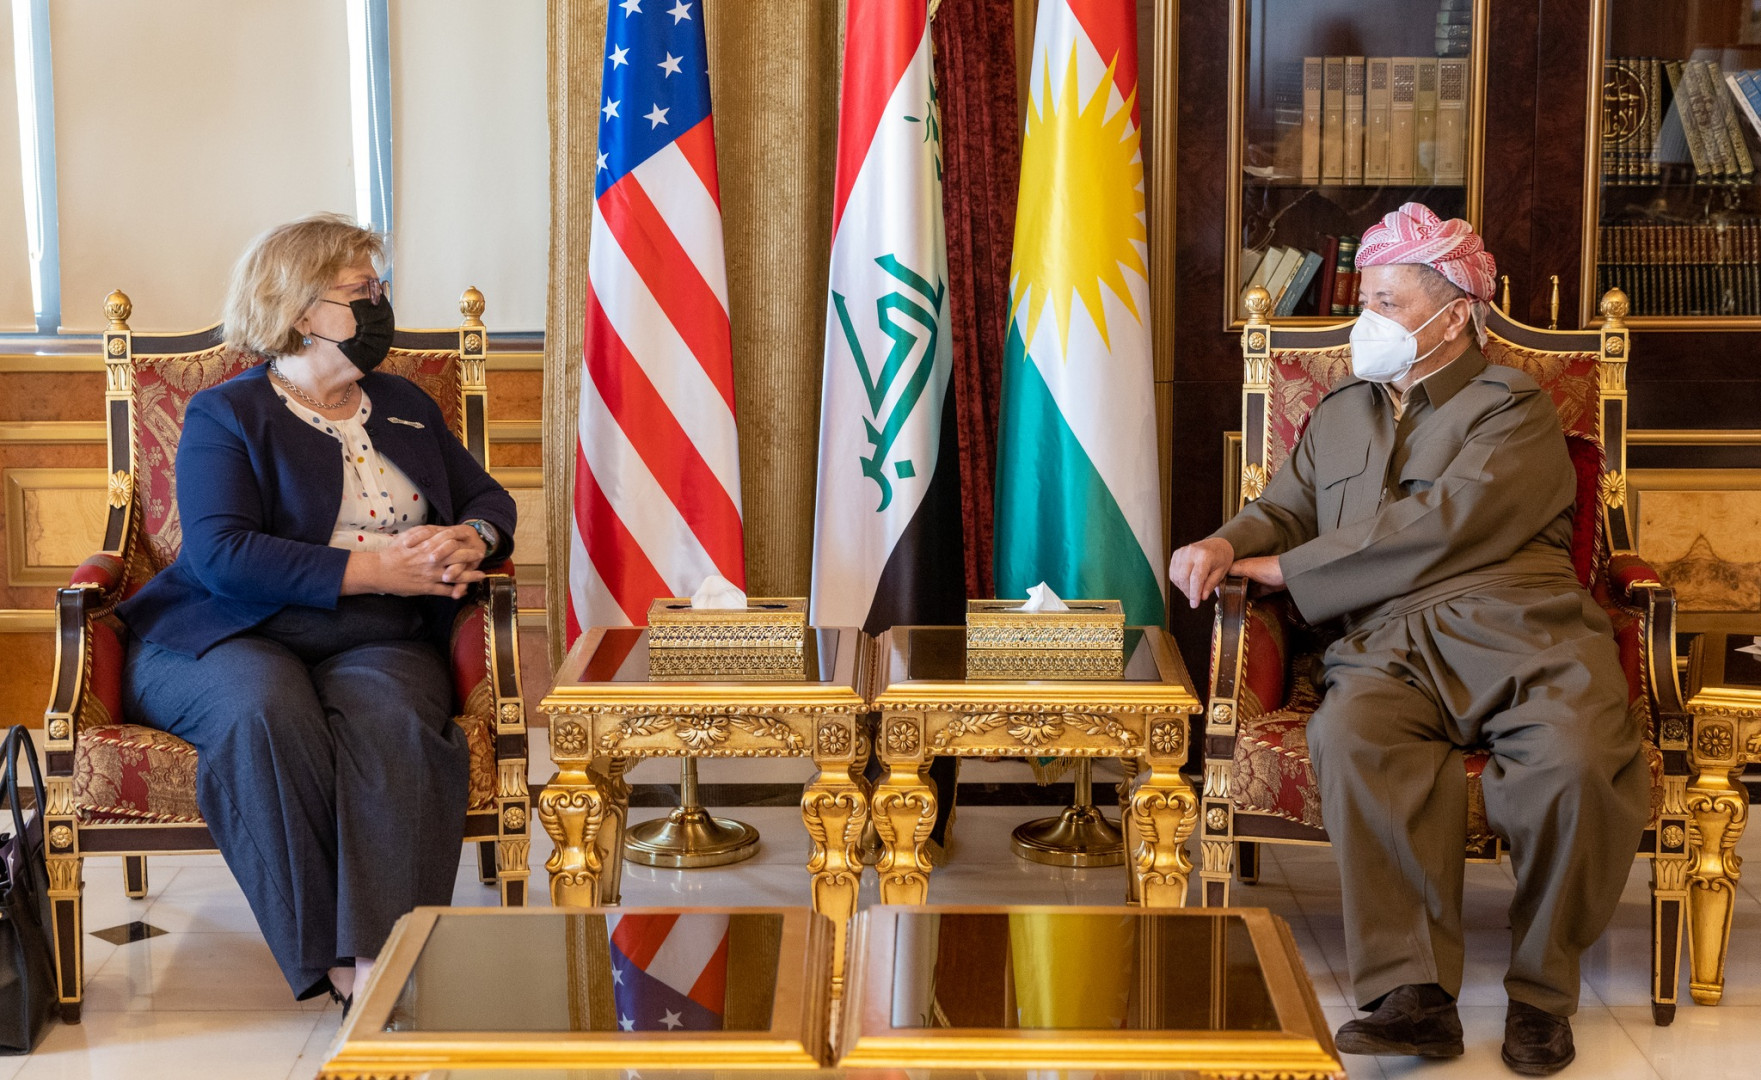 Masoud Barzani: Baghdad does not commit to the constitution 